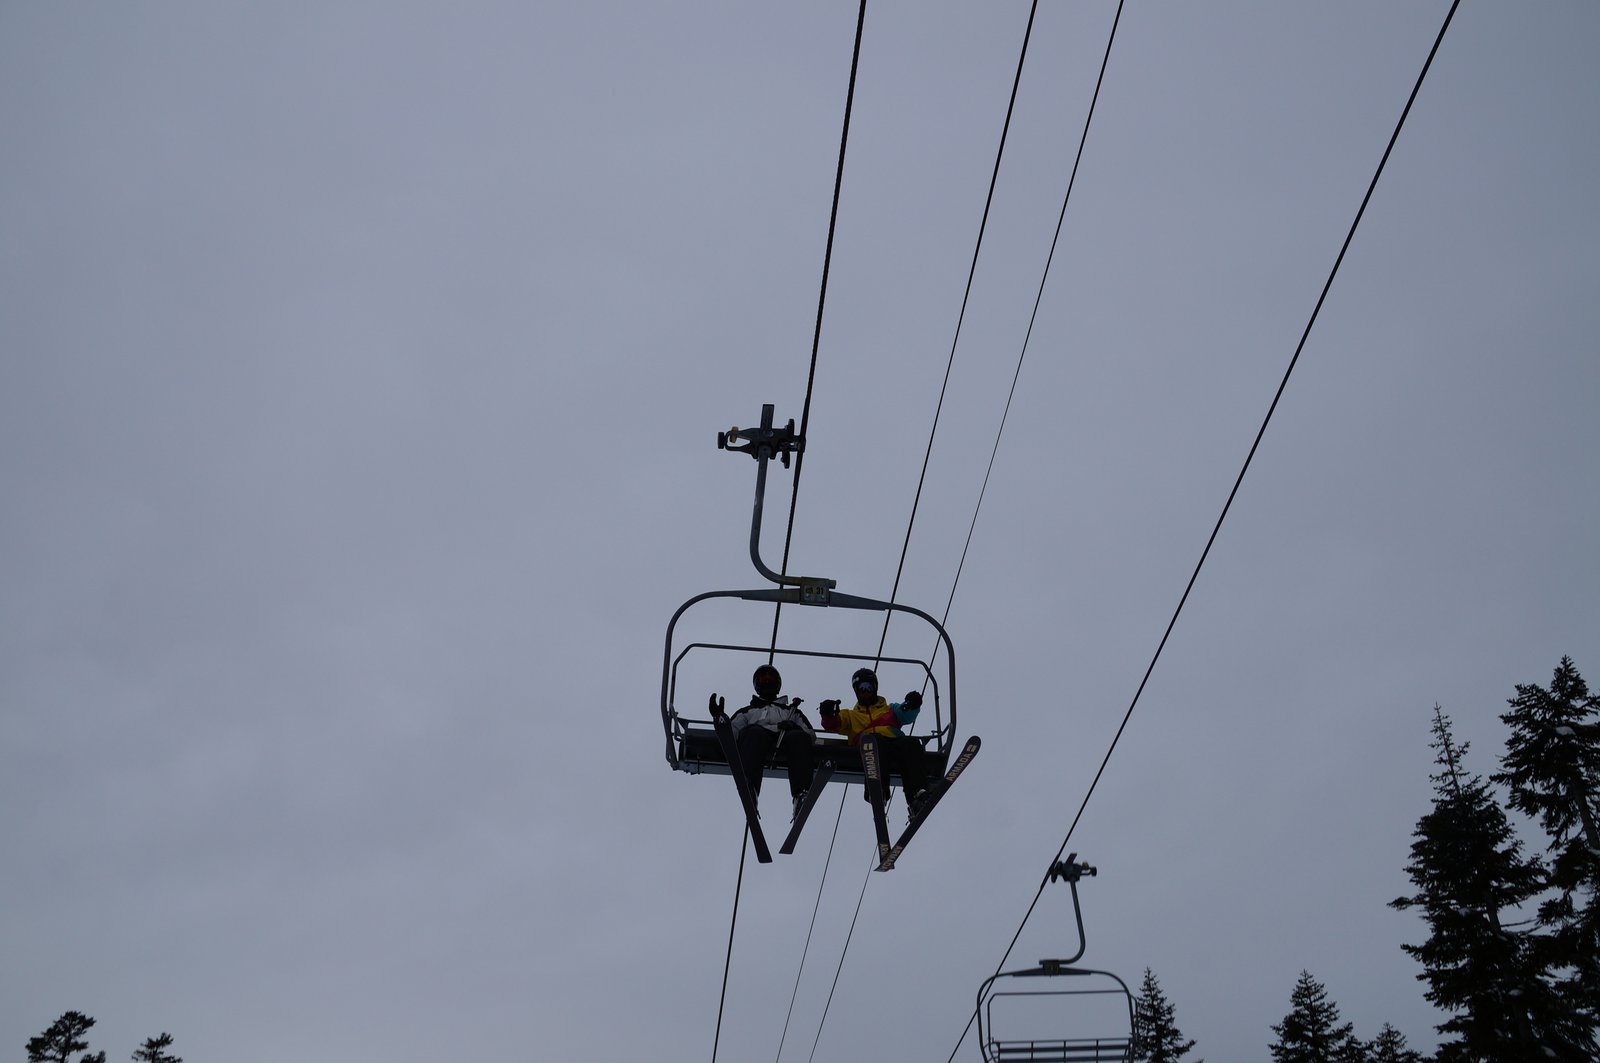 Alex Grover riding up the chairlift